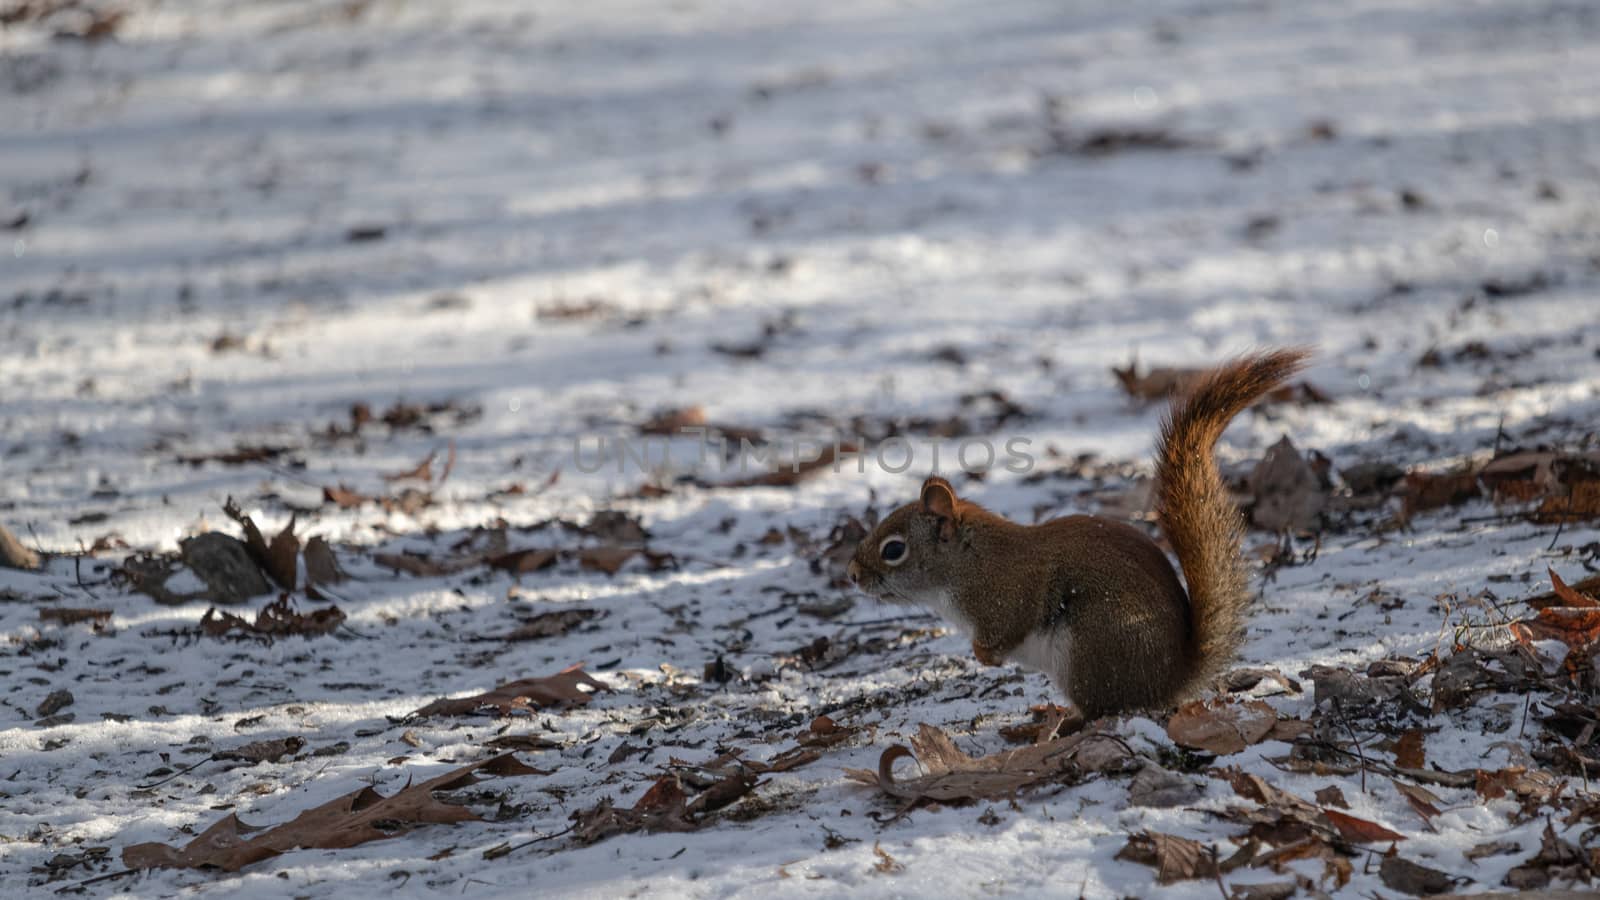 An American Red Squirrel in the Snow by colintemple